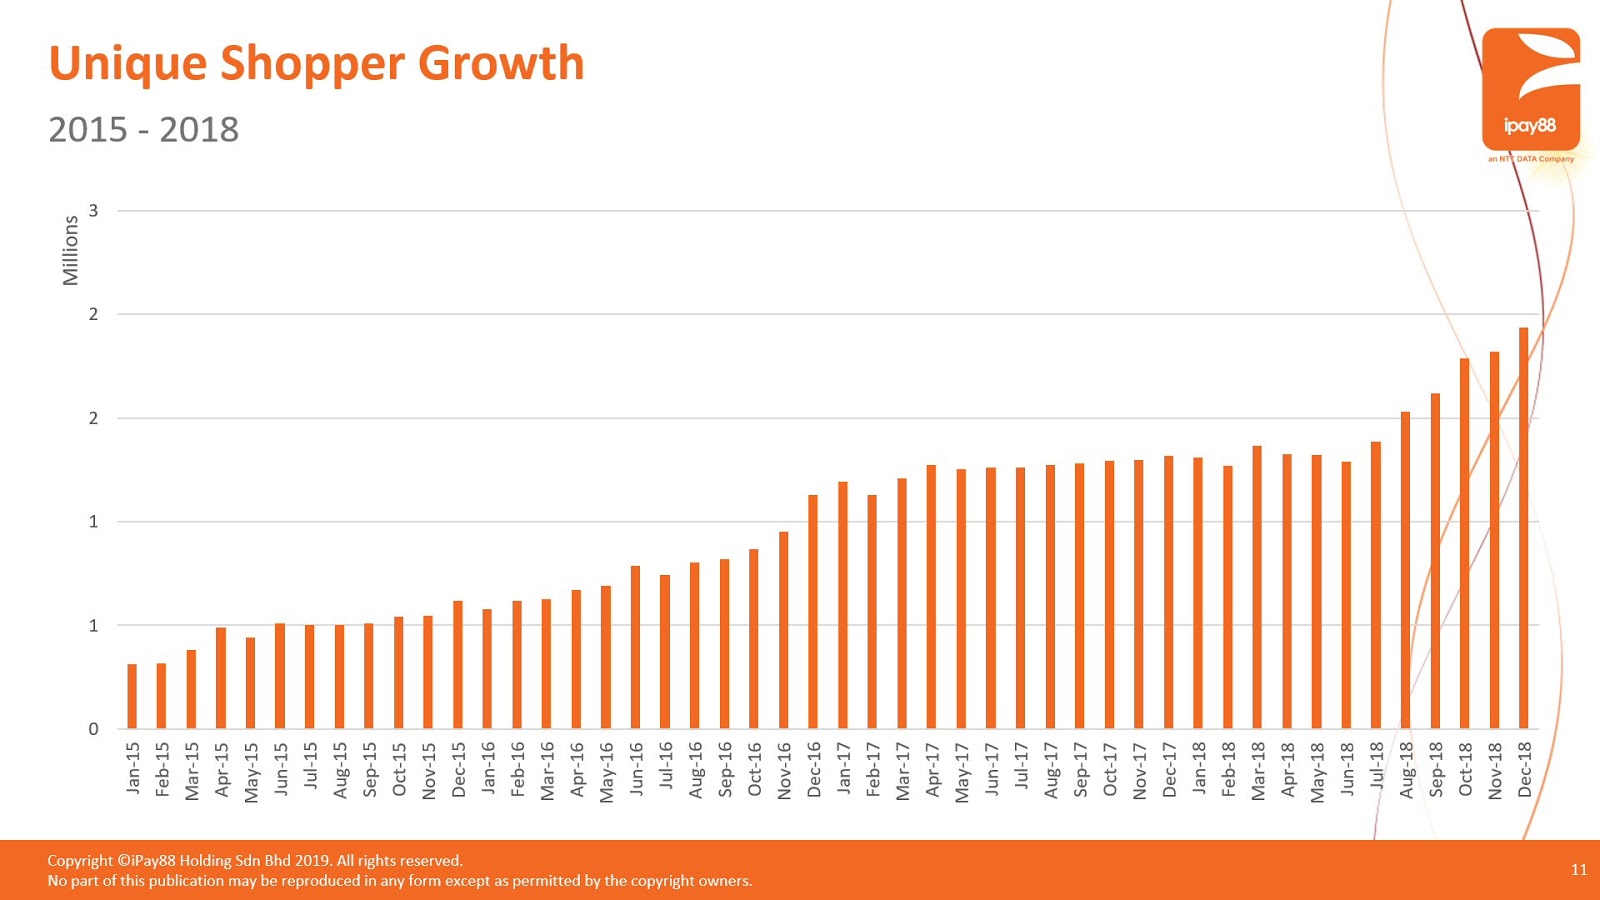 iPay88: Unique Shopper Growth from 2015 to 2018